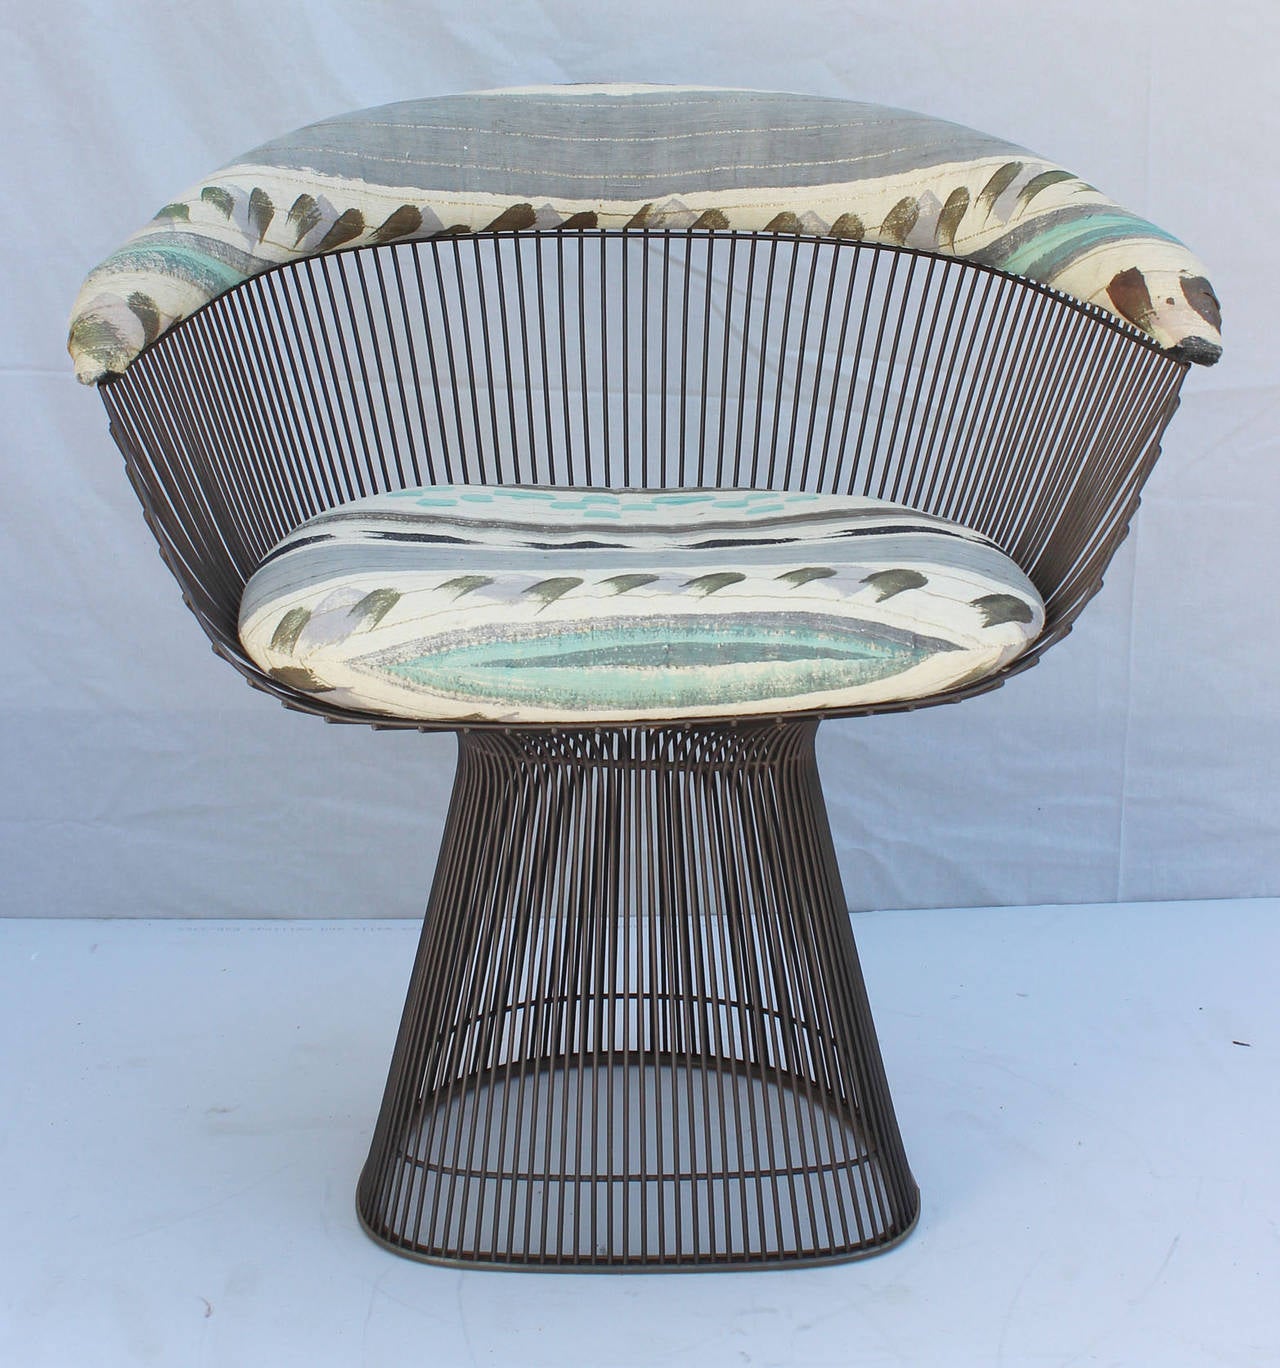 Six bronzetone dining chairs in vintage upholstery, designed by Warren Platner for Knoll.

Matching Platner marble top table also available. Please inquire and see website.